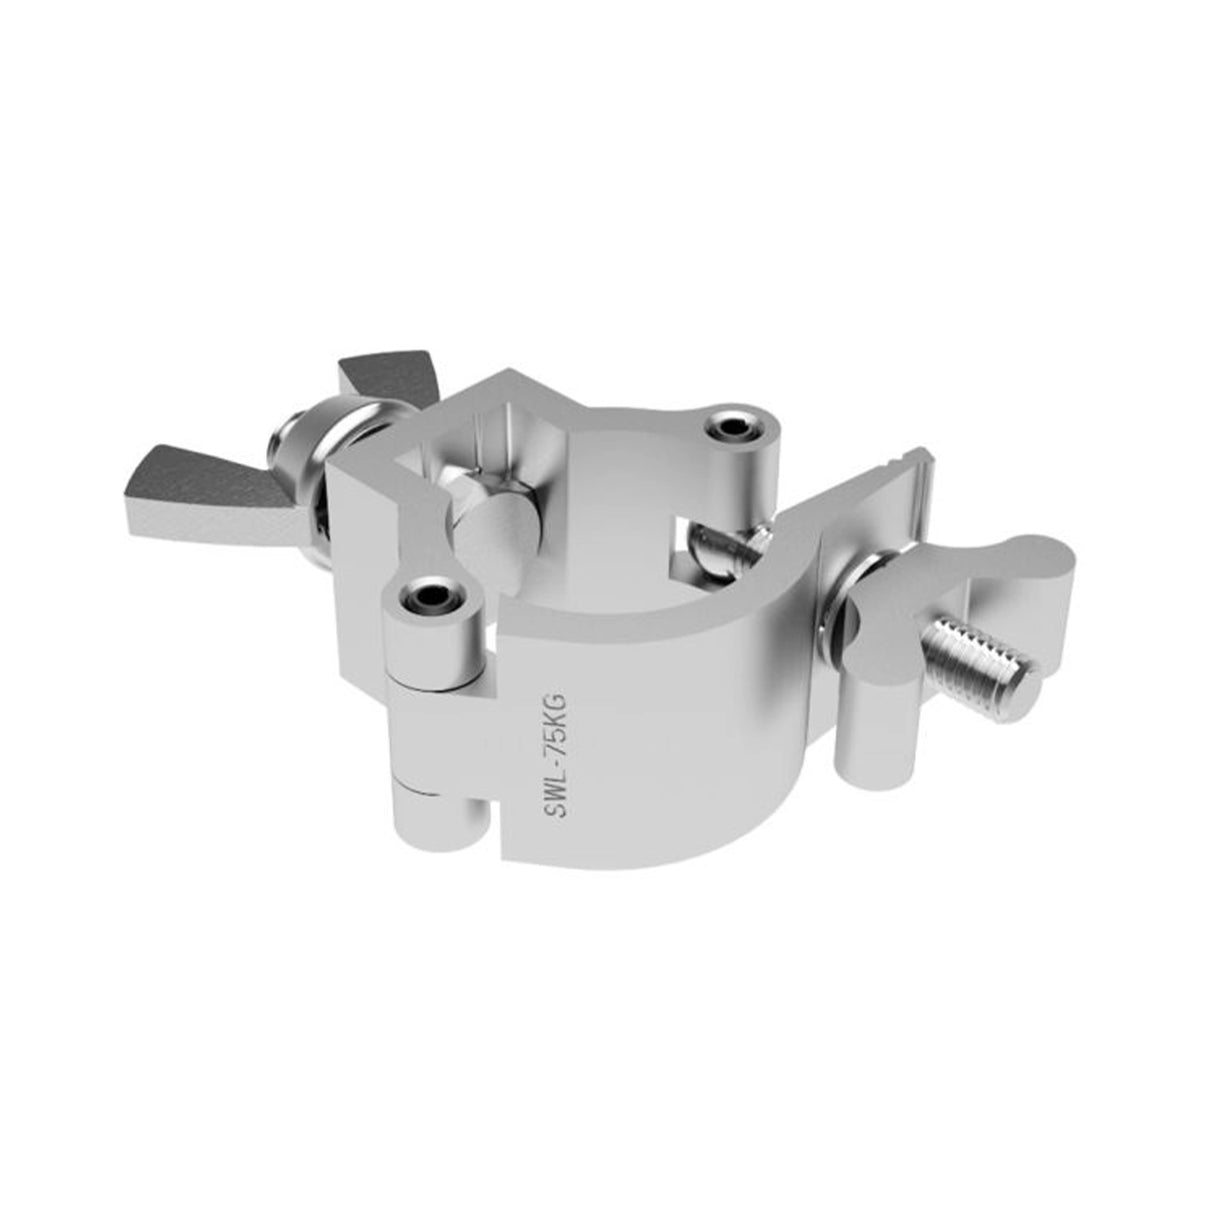 Global Truss Light Duty Clamp for F23/F24